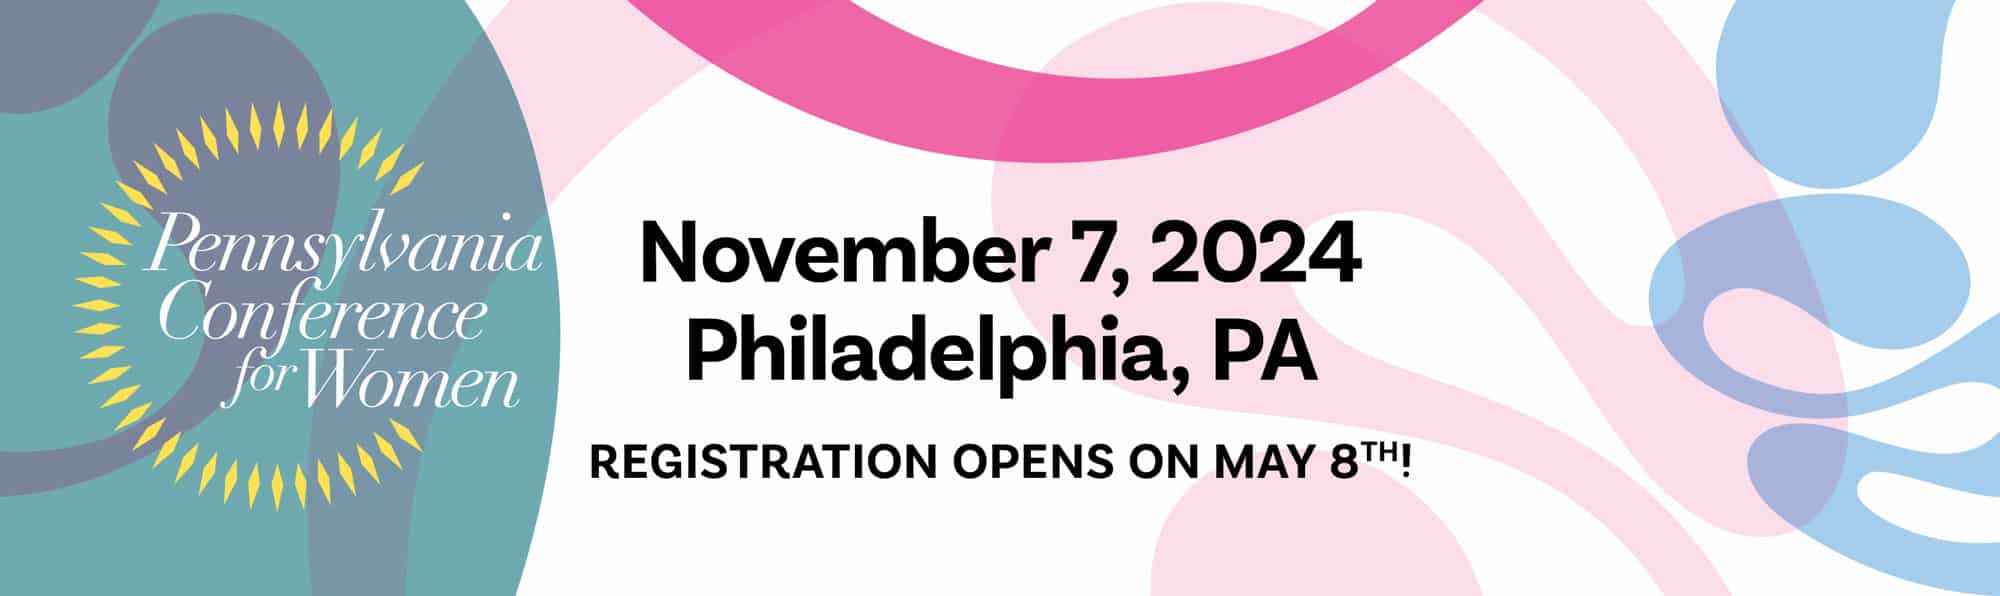 PA Conference for Women: November 7th. Philadelphia, PA. Registration opens May 8th! Click here to get a reminder.